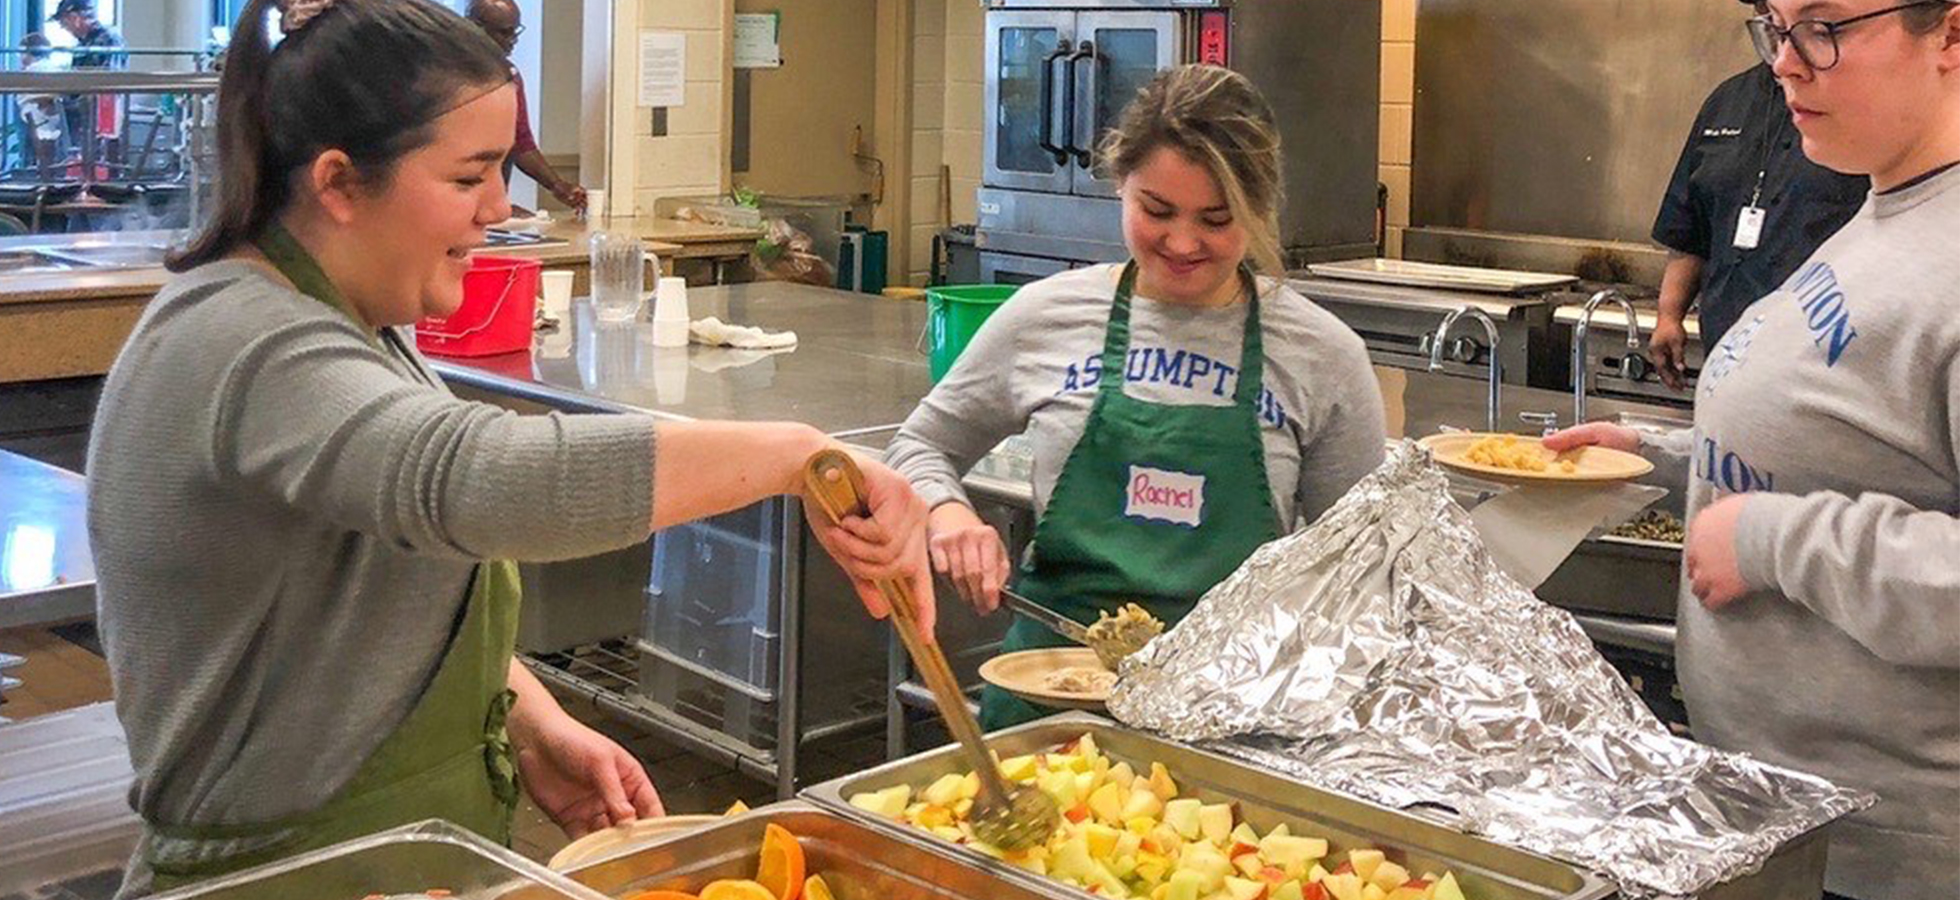 Assumption students serving food to those in need at a shelter in Baltimore, Maryland.